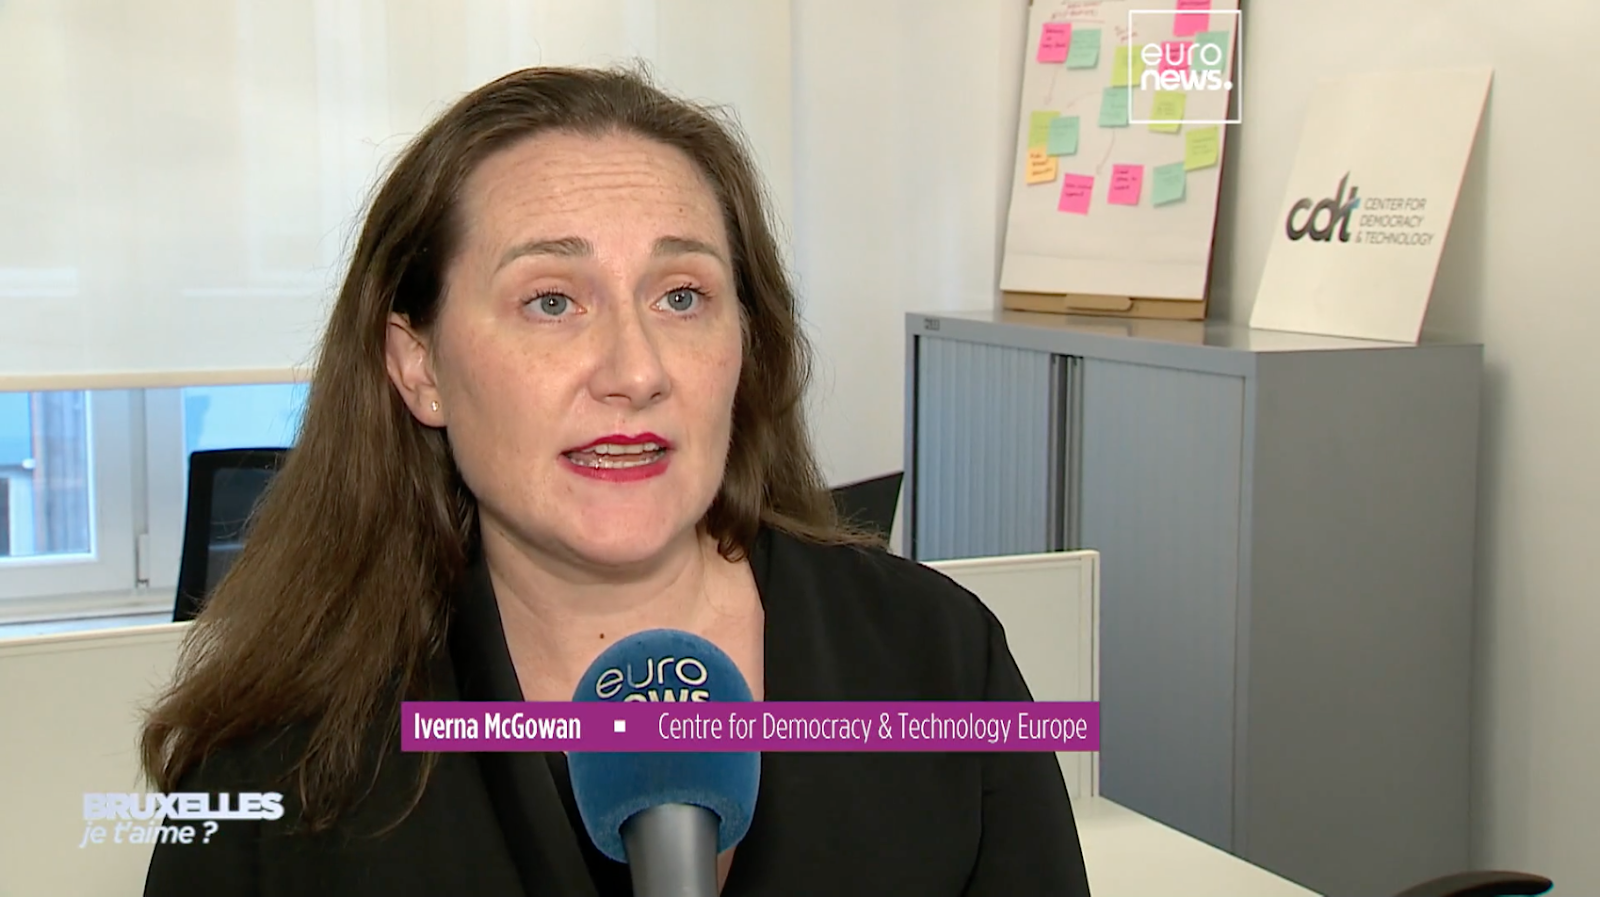 Iverna McGowan, CDT Europe’s Secretary General, speaking at Euronews’ “Brussels, my love?” talk show about the agreement reached in the LIBE Committee on the proposed Regulation to prevent and combat child sexual abuse.